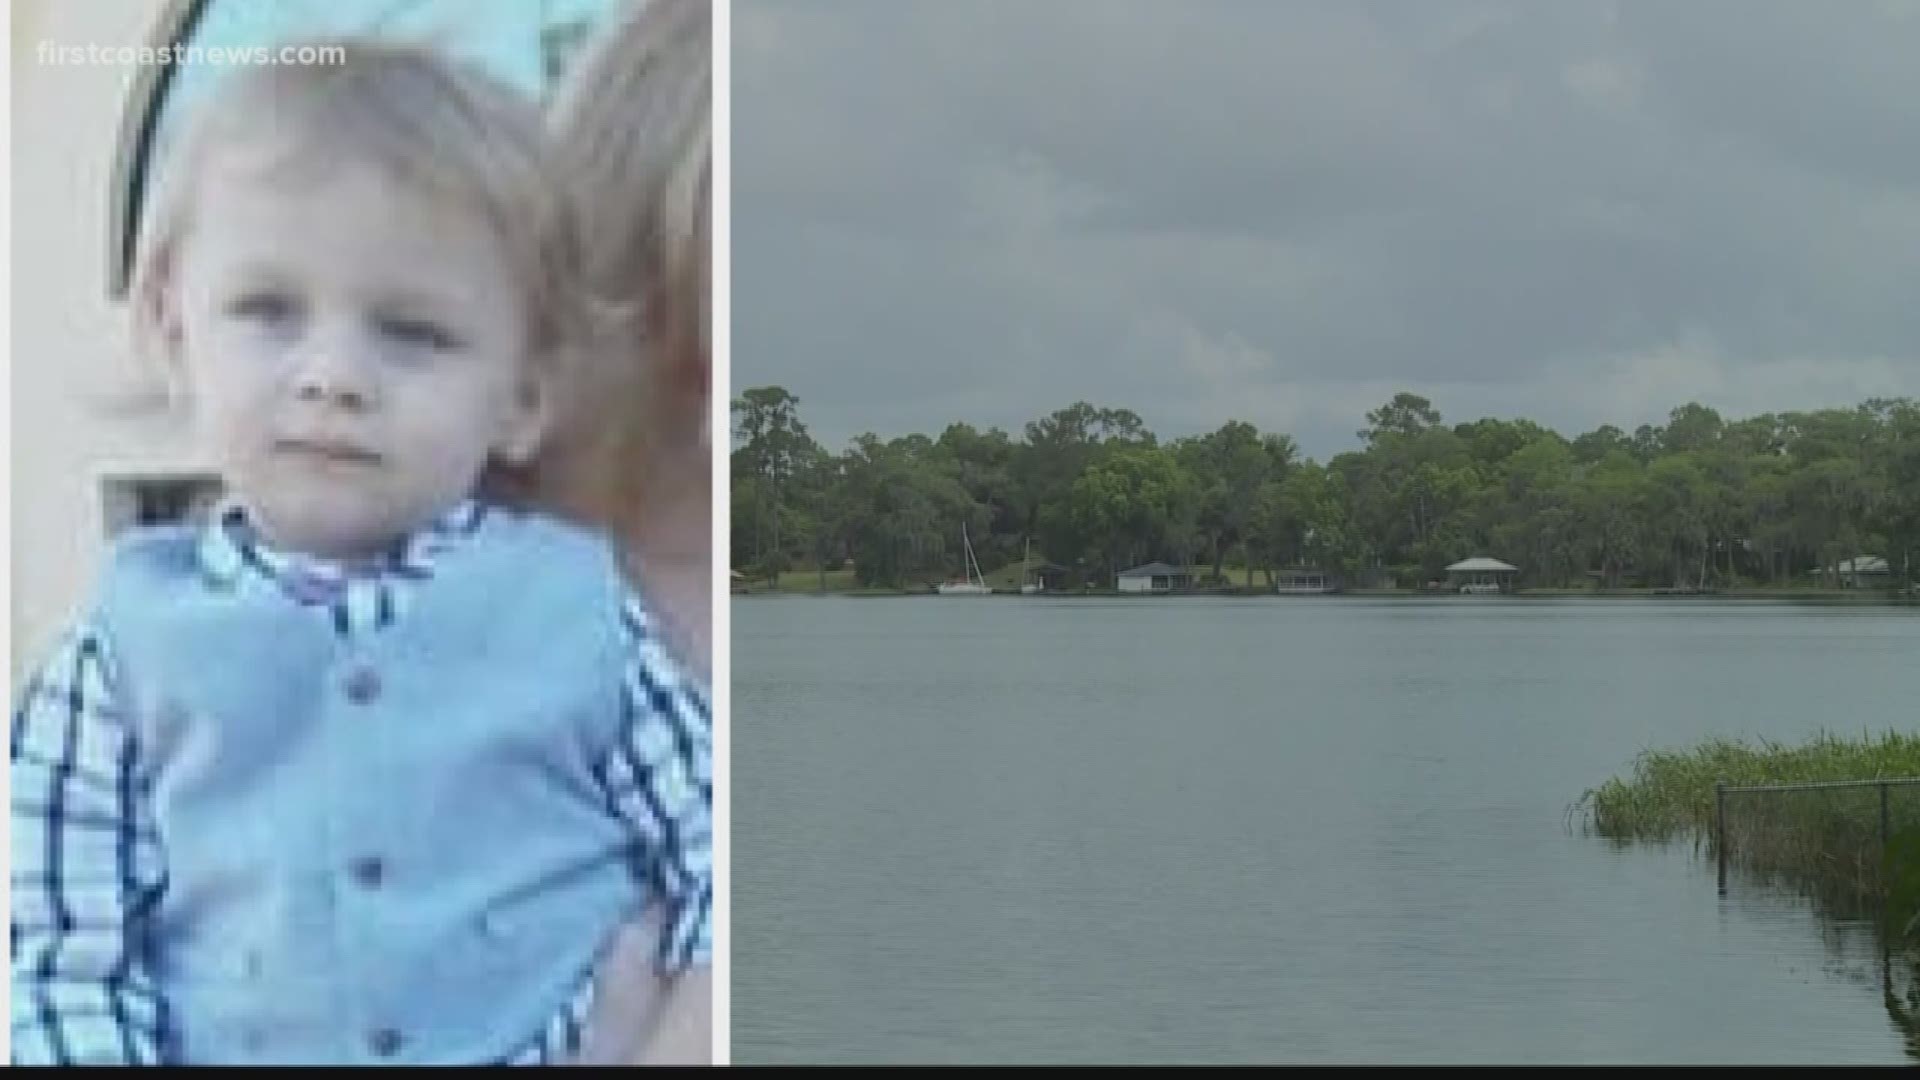 A public viewing for Jackson Lee Taggart, 2, will be held on Tuesday, May 7 at 10 a.m. at the Freedom Baptist Church